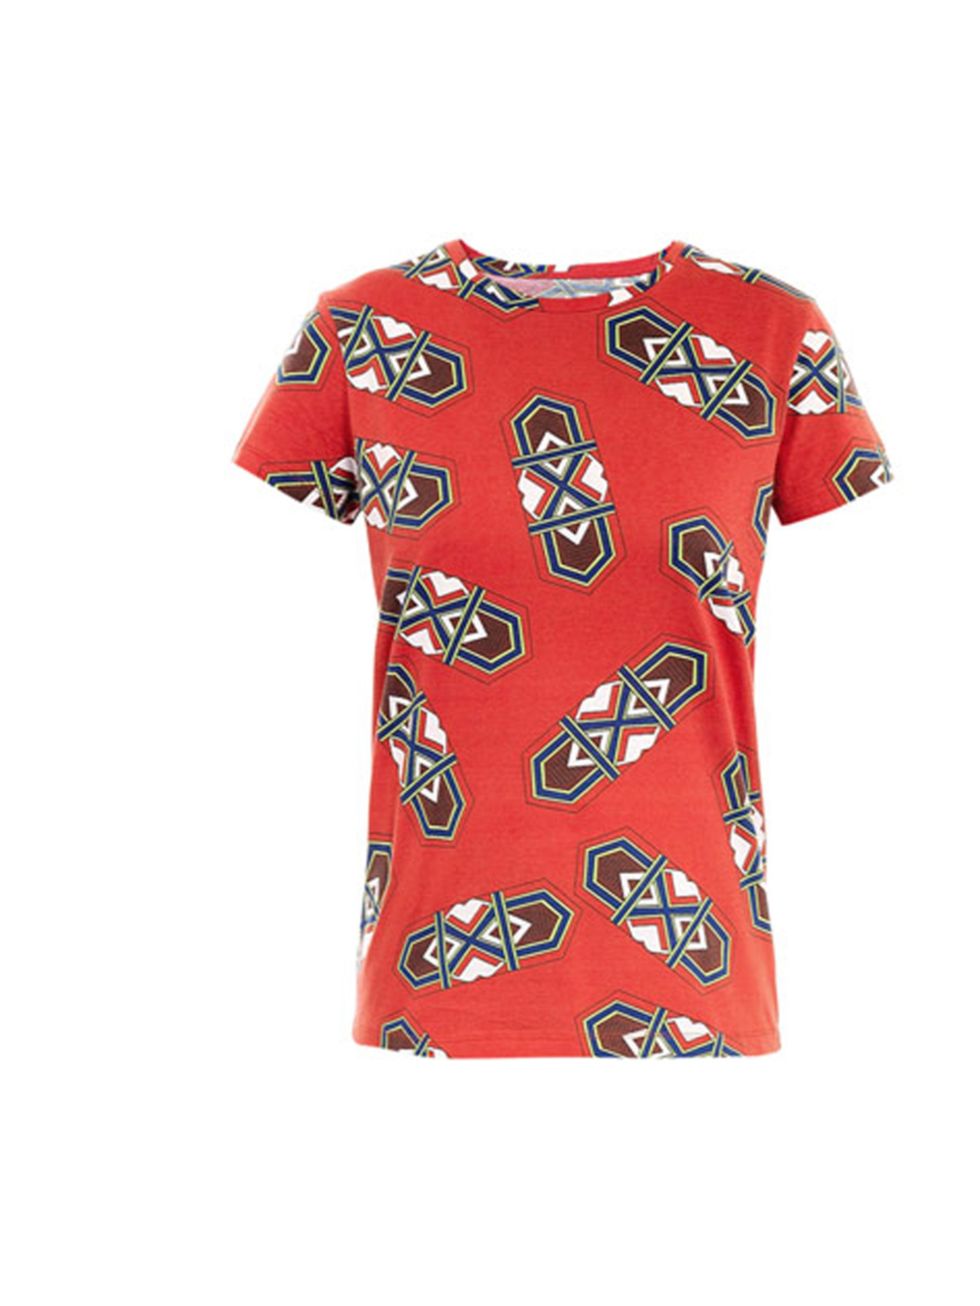 <p>J.W. Anderson chairty printed T-shirt, £60, at Matches</p><p><a href="http://shopping.elleuk.com/browse/women?fts=matches+charity+j.w.+anderson">BUY NOW</a></p>